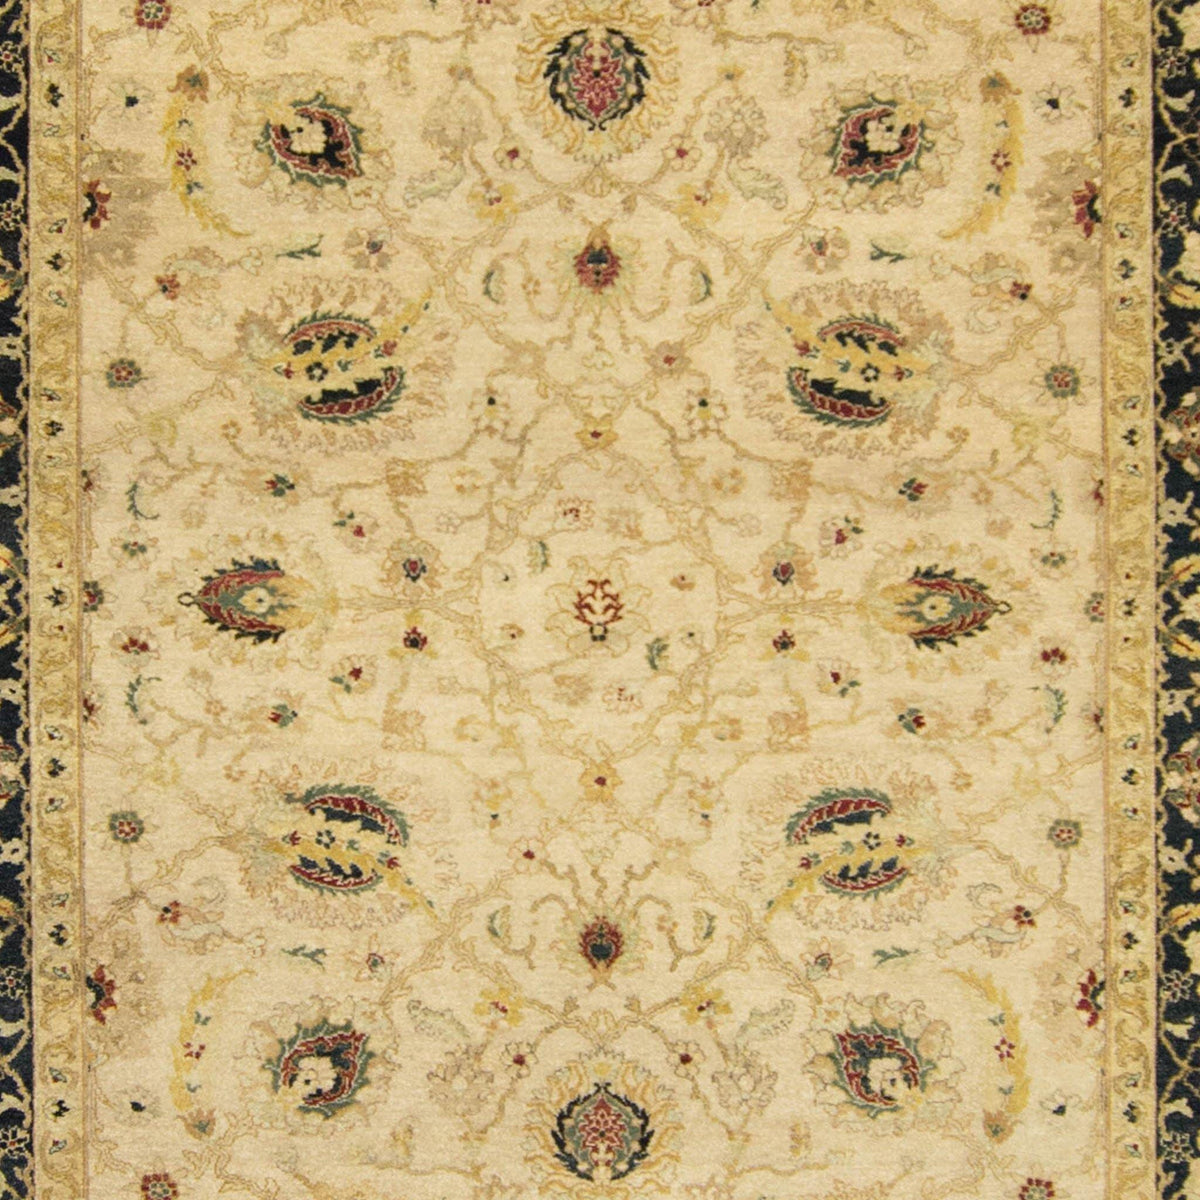 Find Hand-knotted Wool Large Rug 251cm x 305cm